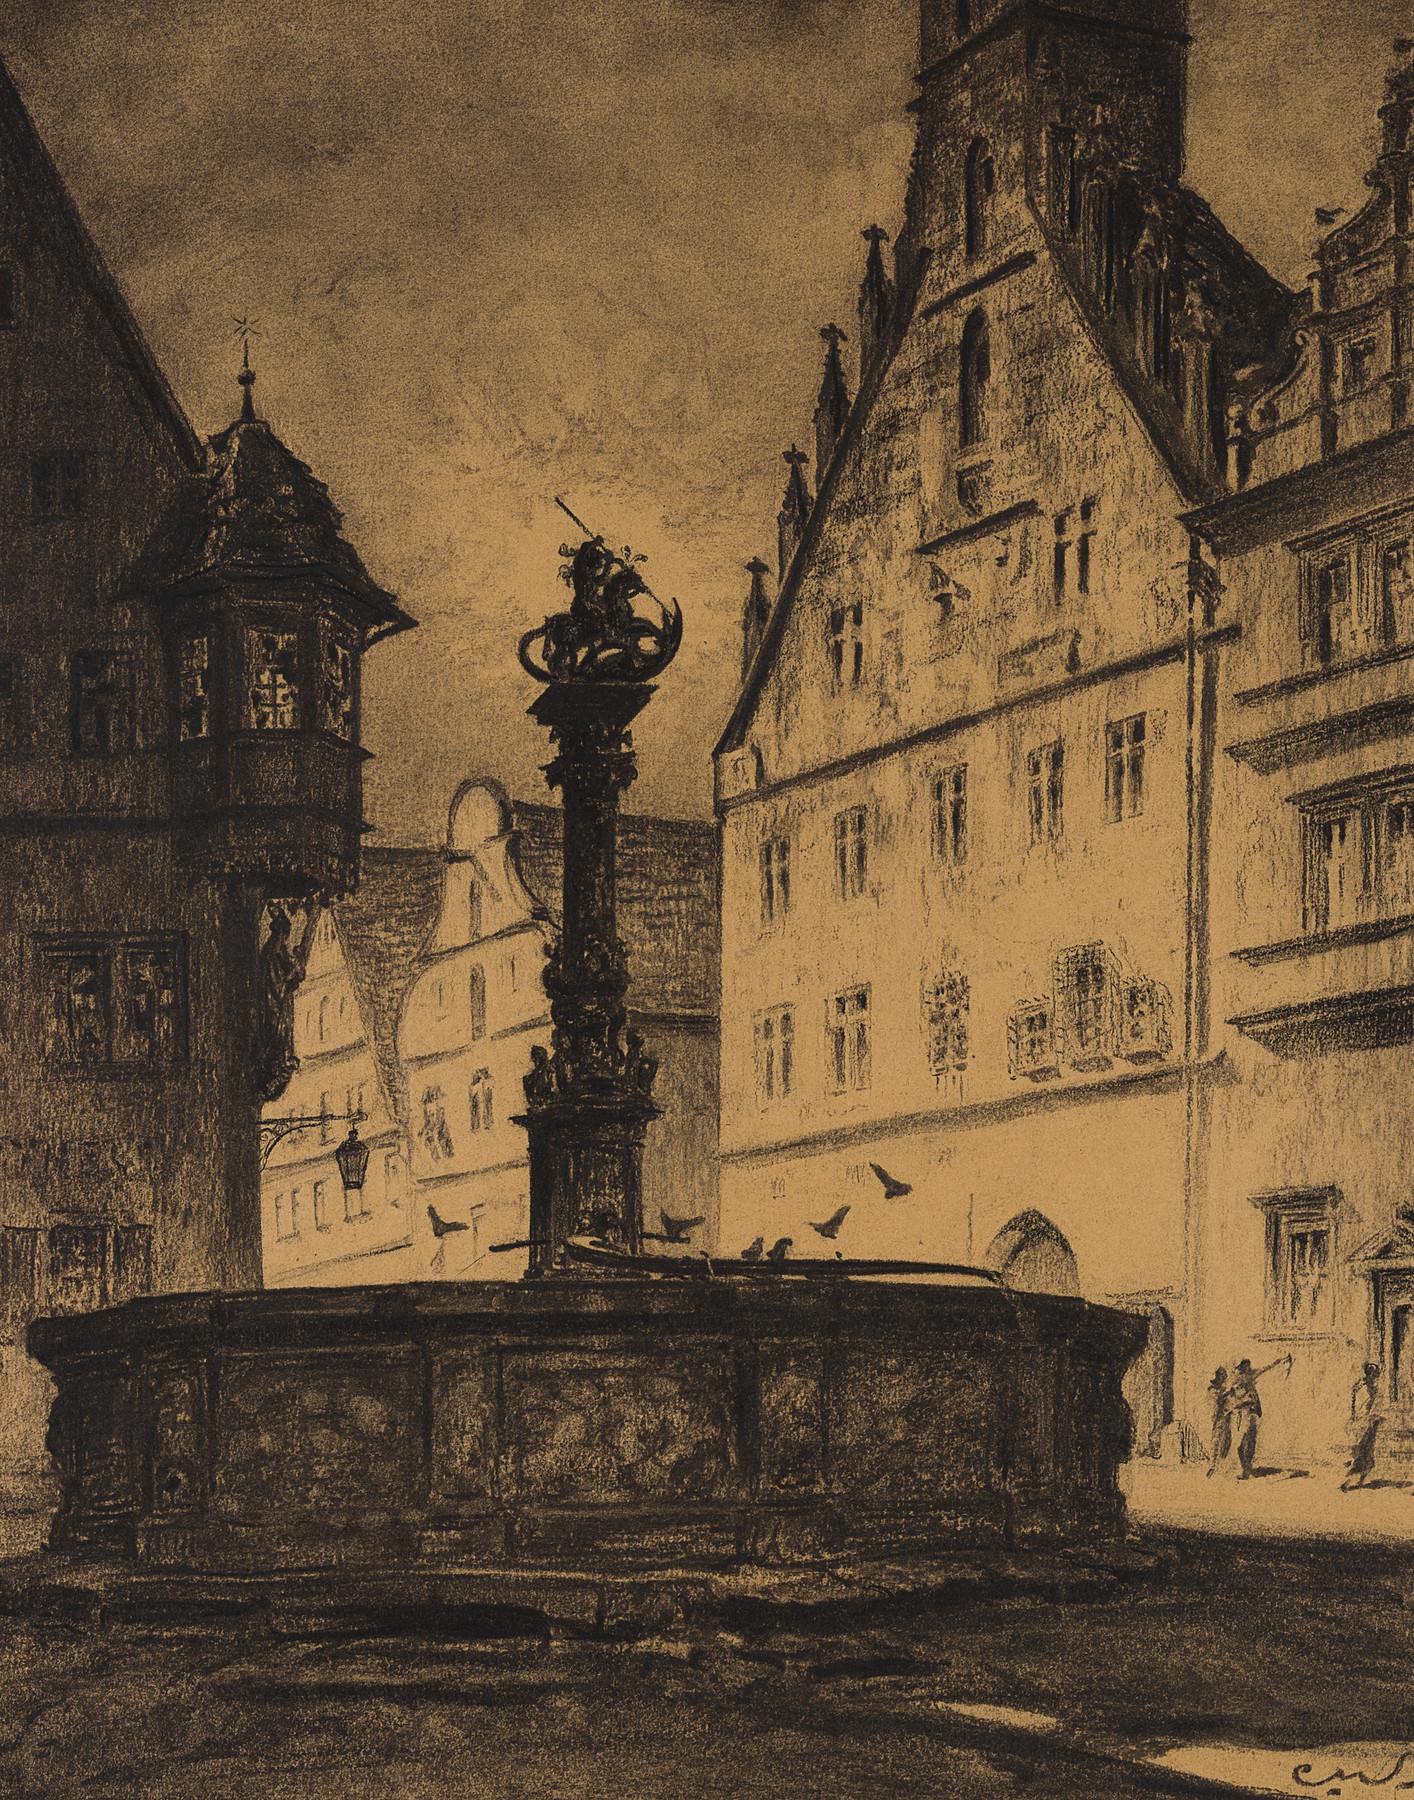 St George's Fountain and Town Hall in Rothenburg ob der Tauber